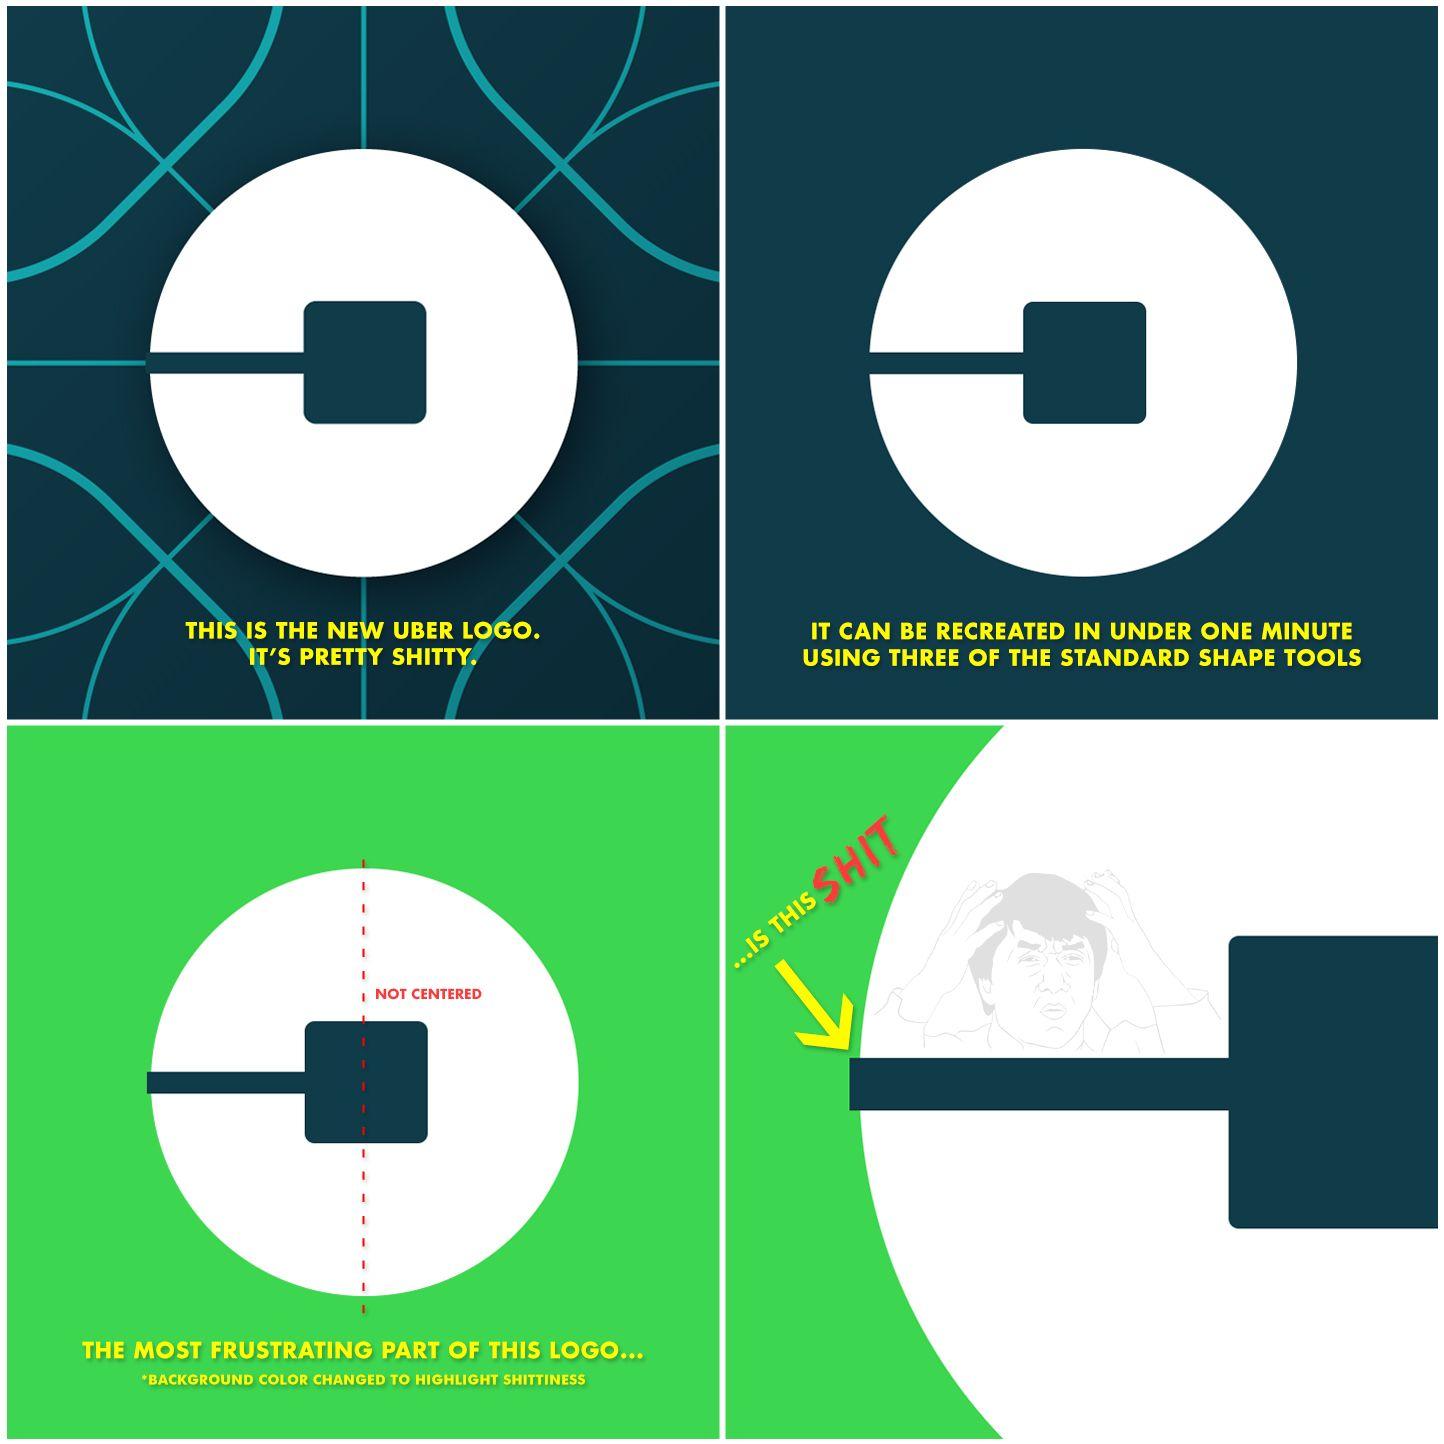 All Uber Logo - A close look at the new Uber logo reveals infuriatingly untidy ...